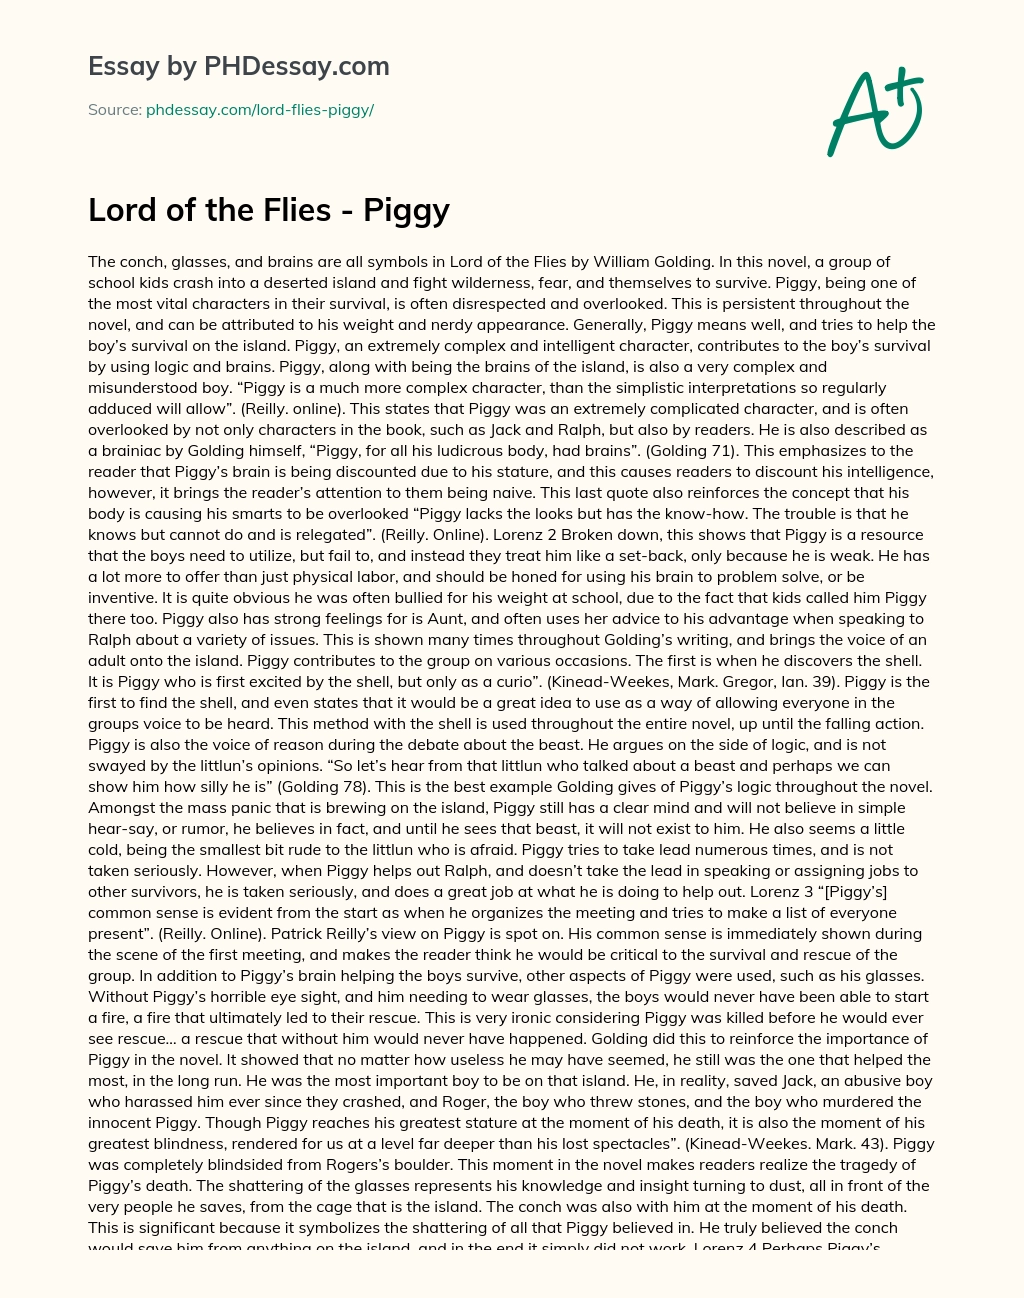 piggys death lord of the flies